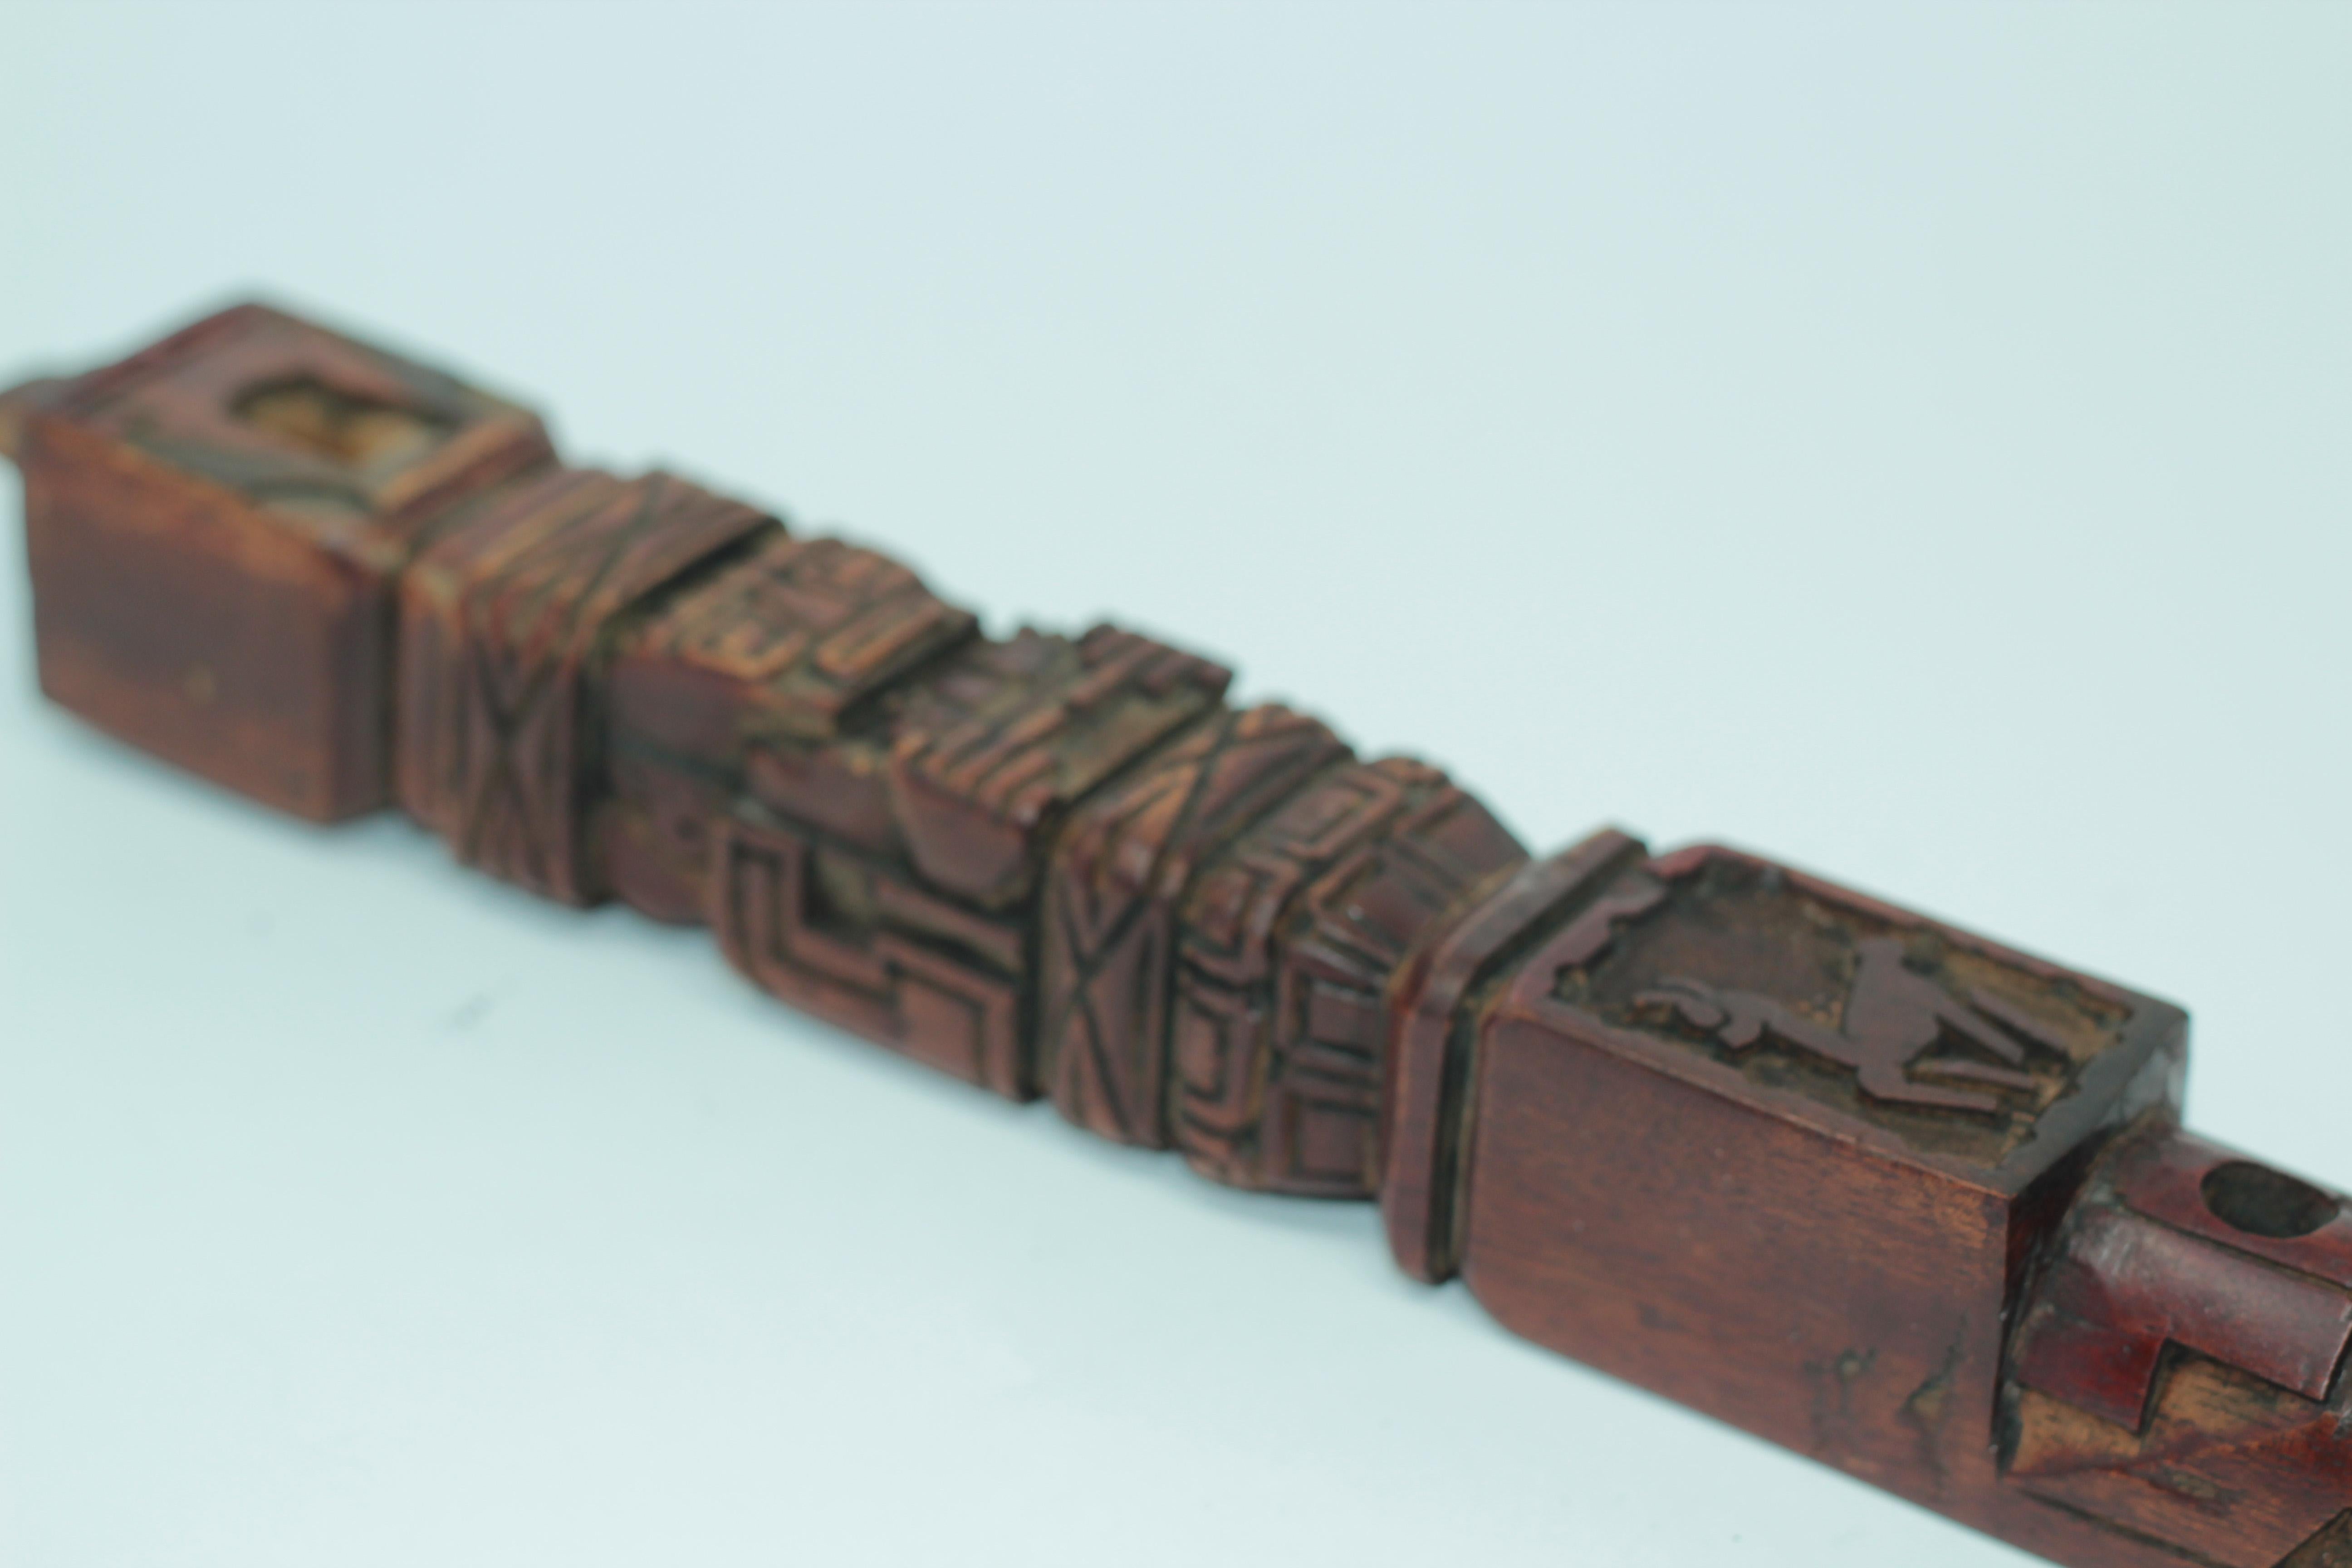 Antique Peruvian Inca flute, beautiful hand carved wooden flute.
Inca Tarka Peru wooden Quena flute.
Hand carved and hand painted the quena is a traditional Andean flute commonly used in many areas of traditional Peruvian and Bolivian music. The